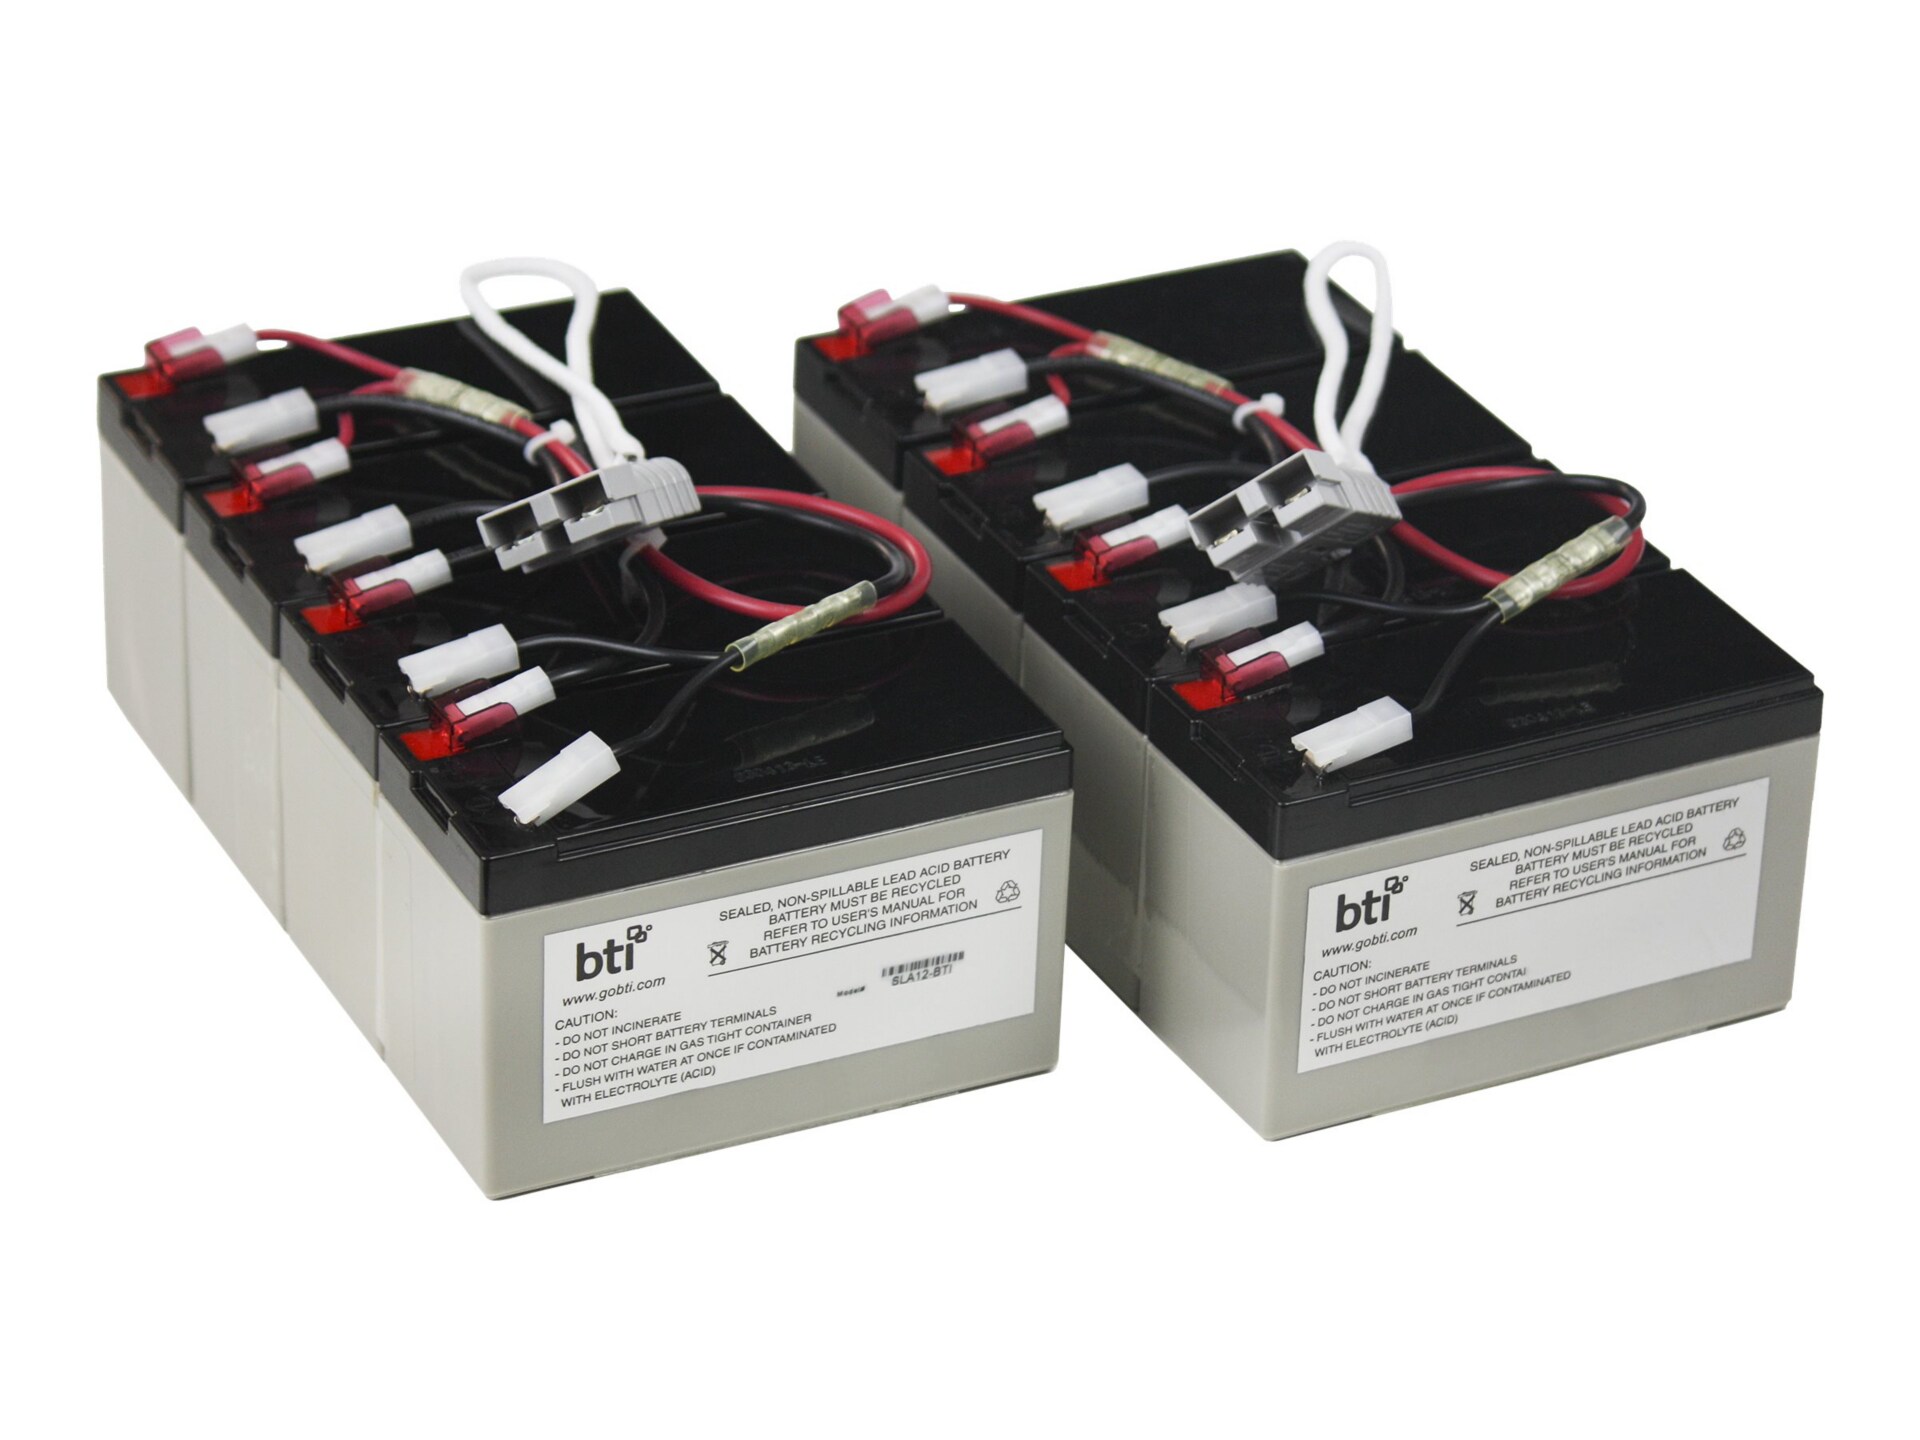 Battery Technology – BTI Replacement Battery for the RBC12 UPS Battery